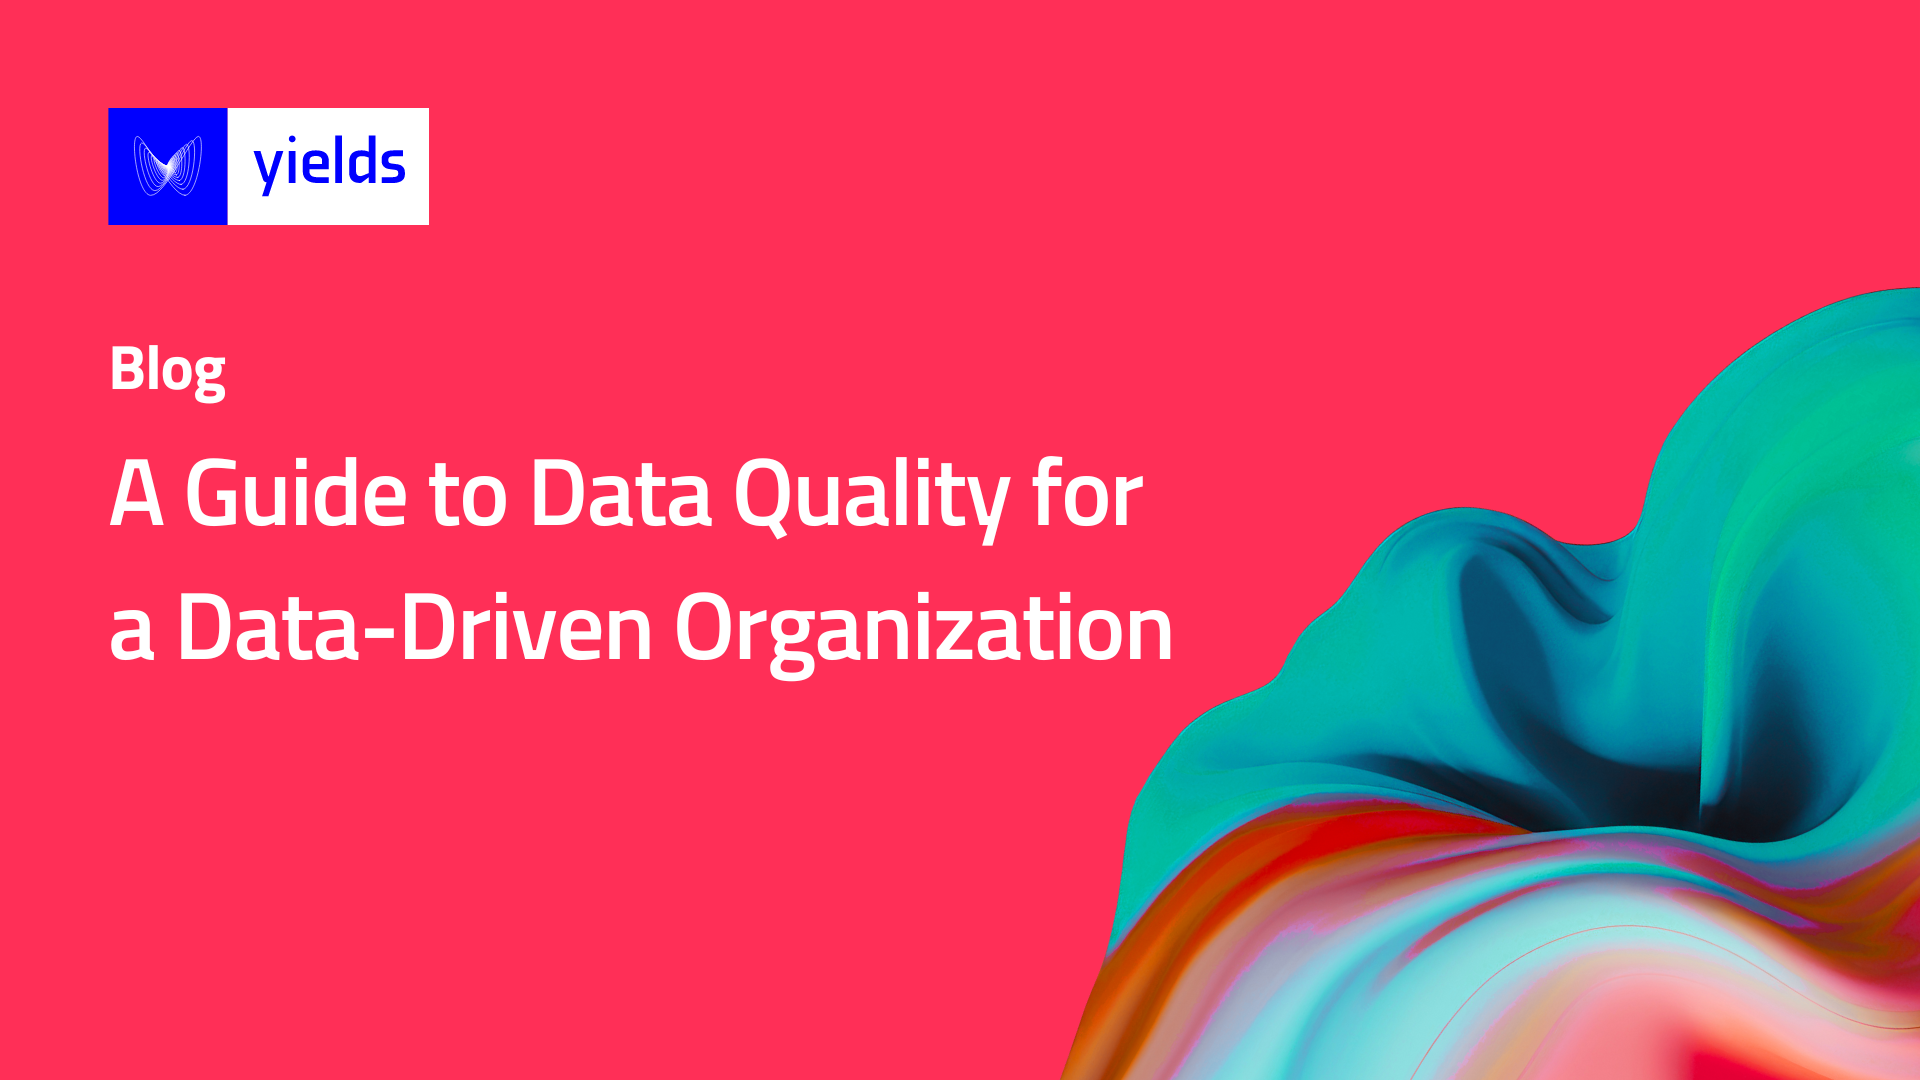 A Guide to Data Quality for a Data-Driven Organization